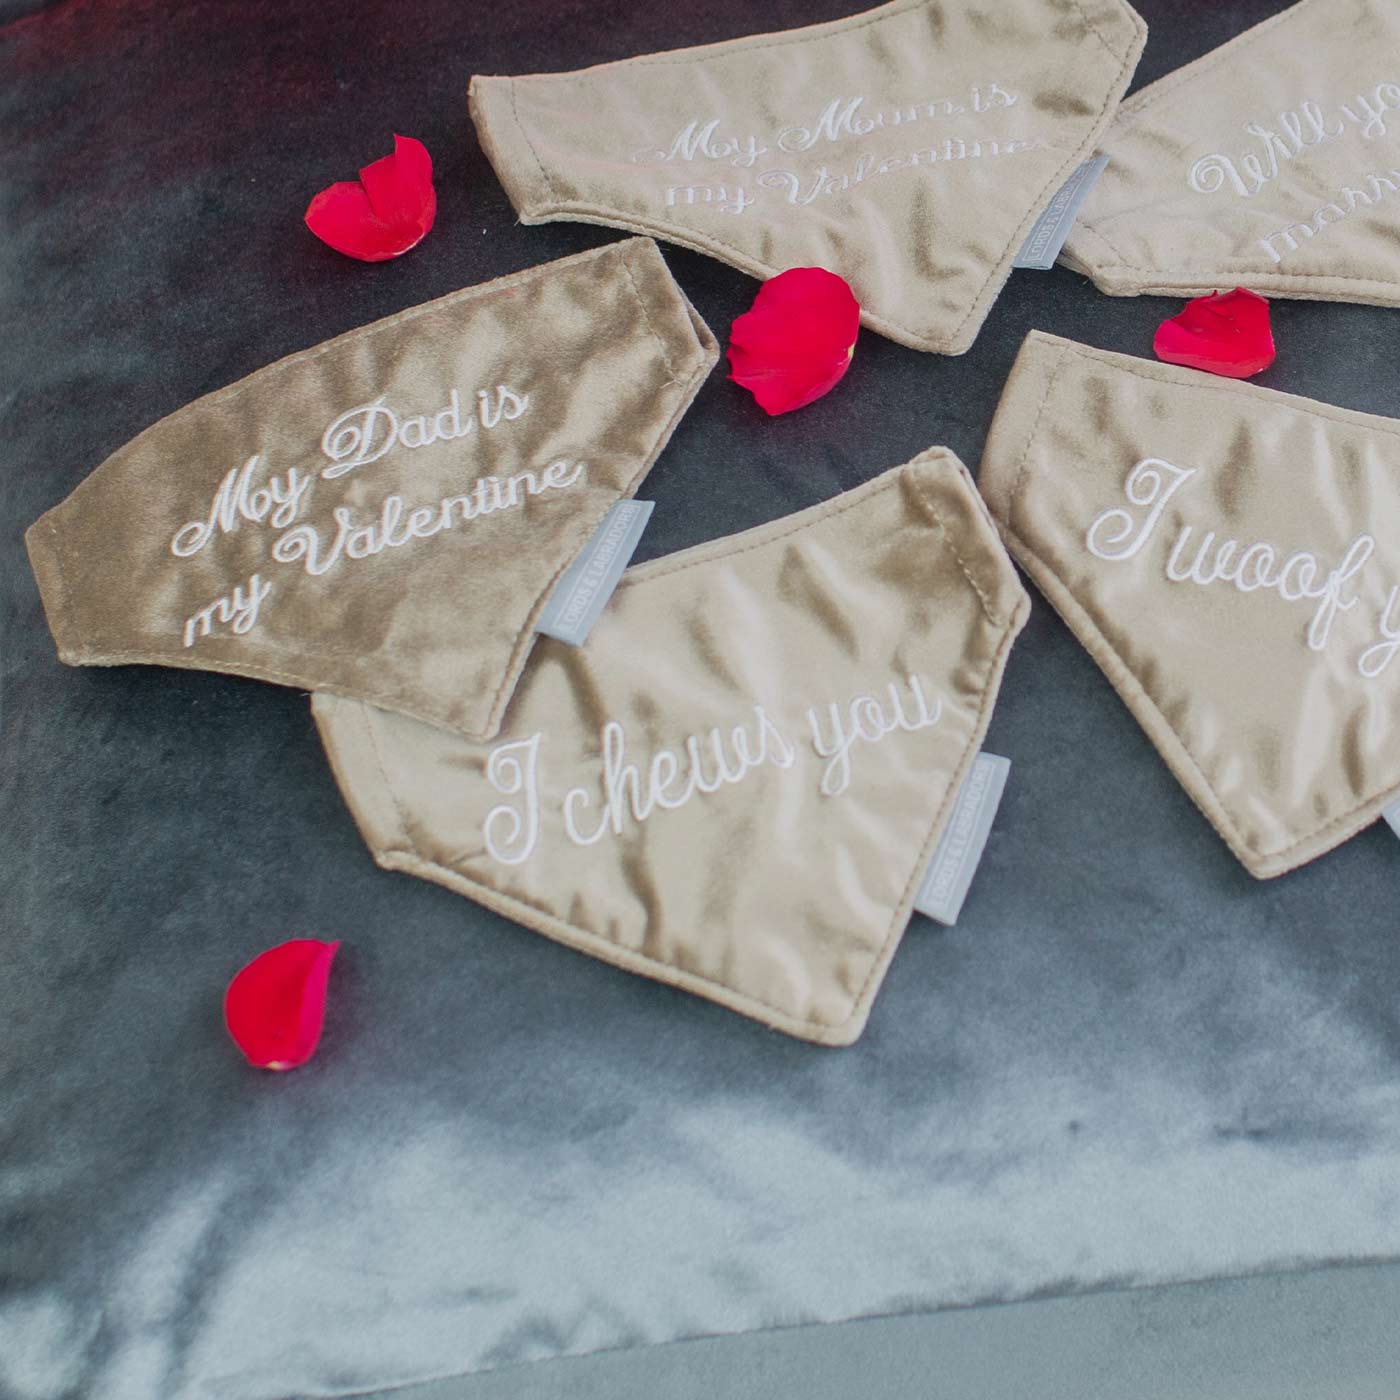 [color:mushroom velvet] Discover The Perfect Bandana For Dogs, 'I Chews You' Valentine Dog Bandana In Luxury Mushroom Velvet, Available Now at Lords & Labradors US